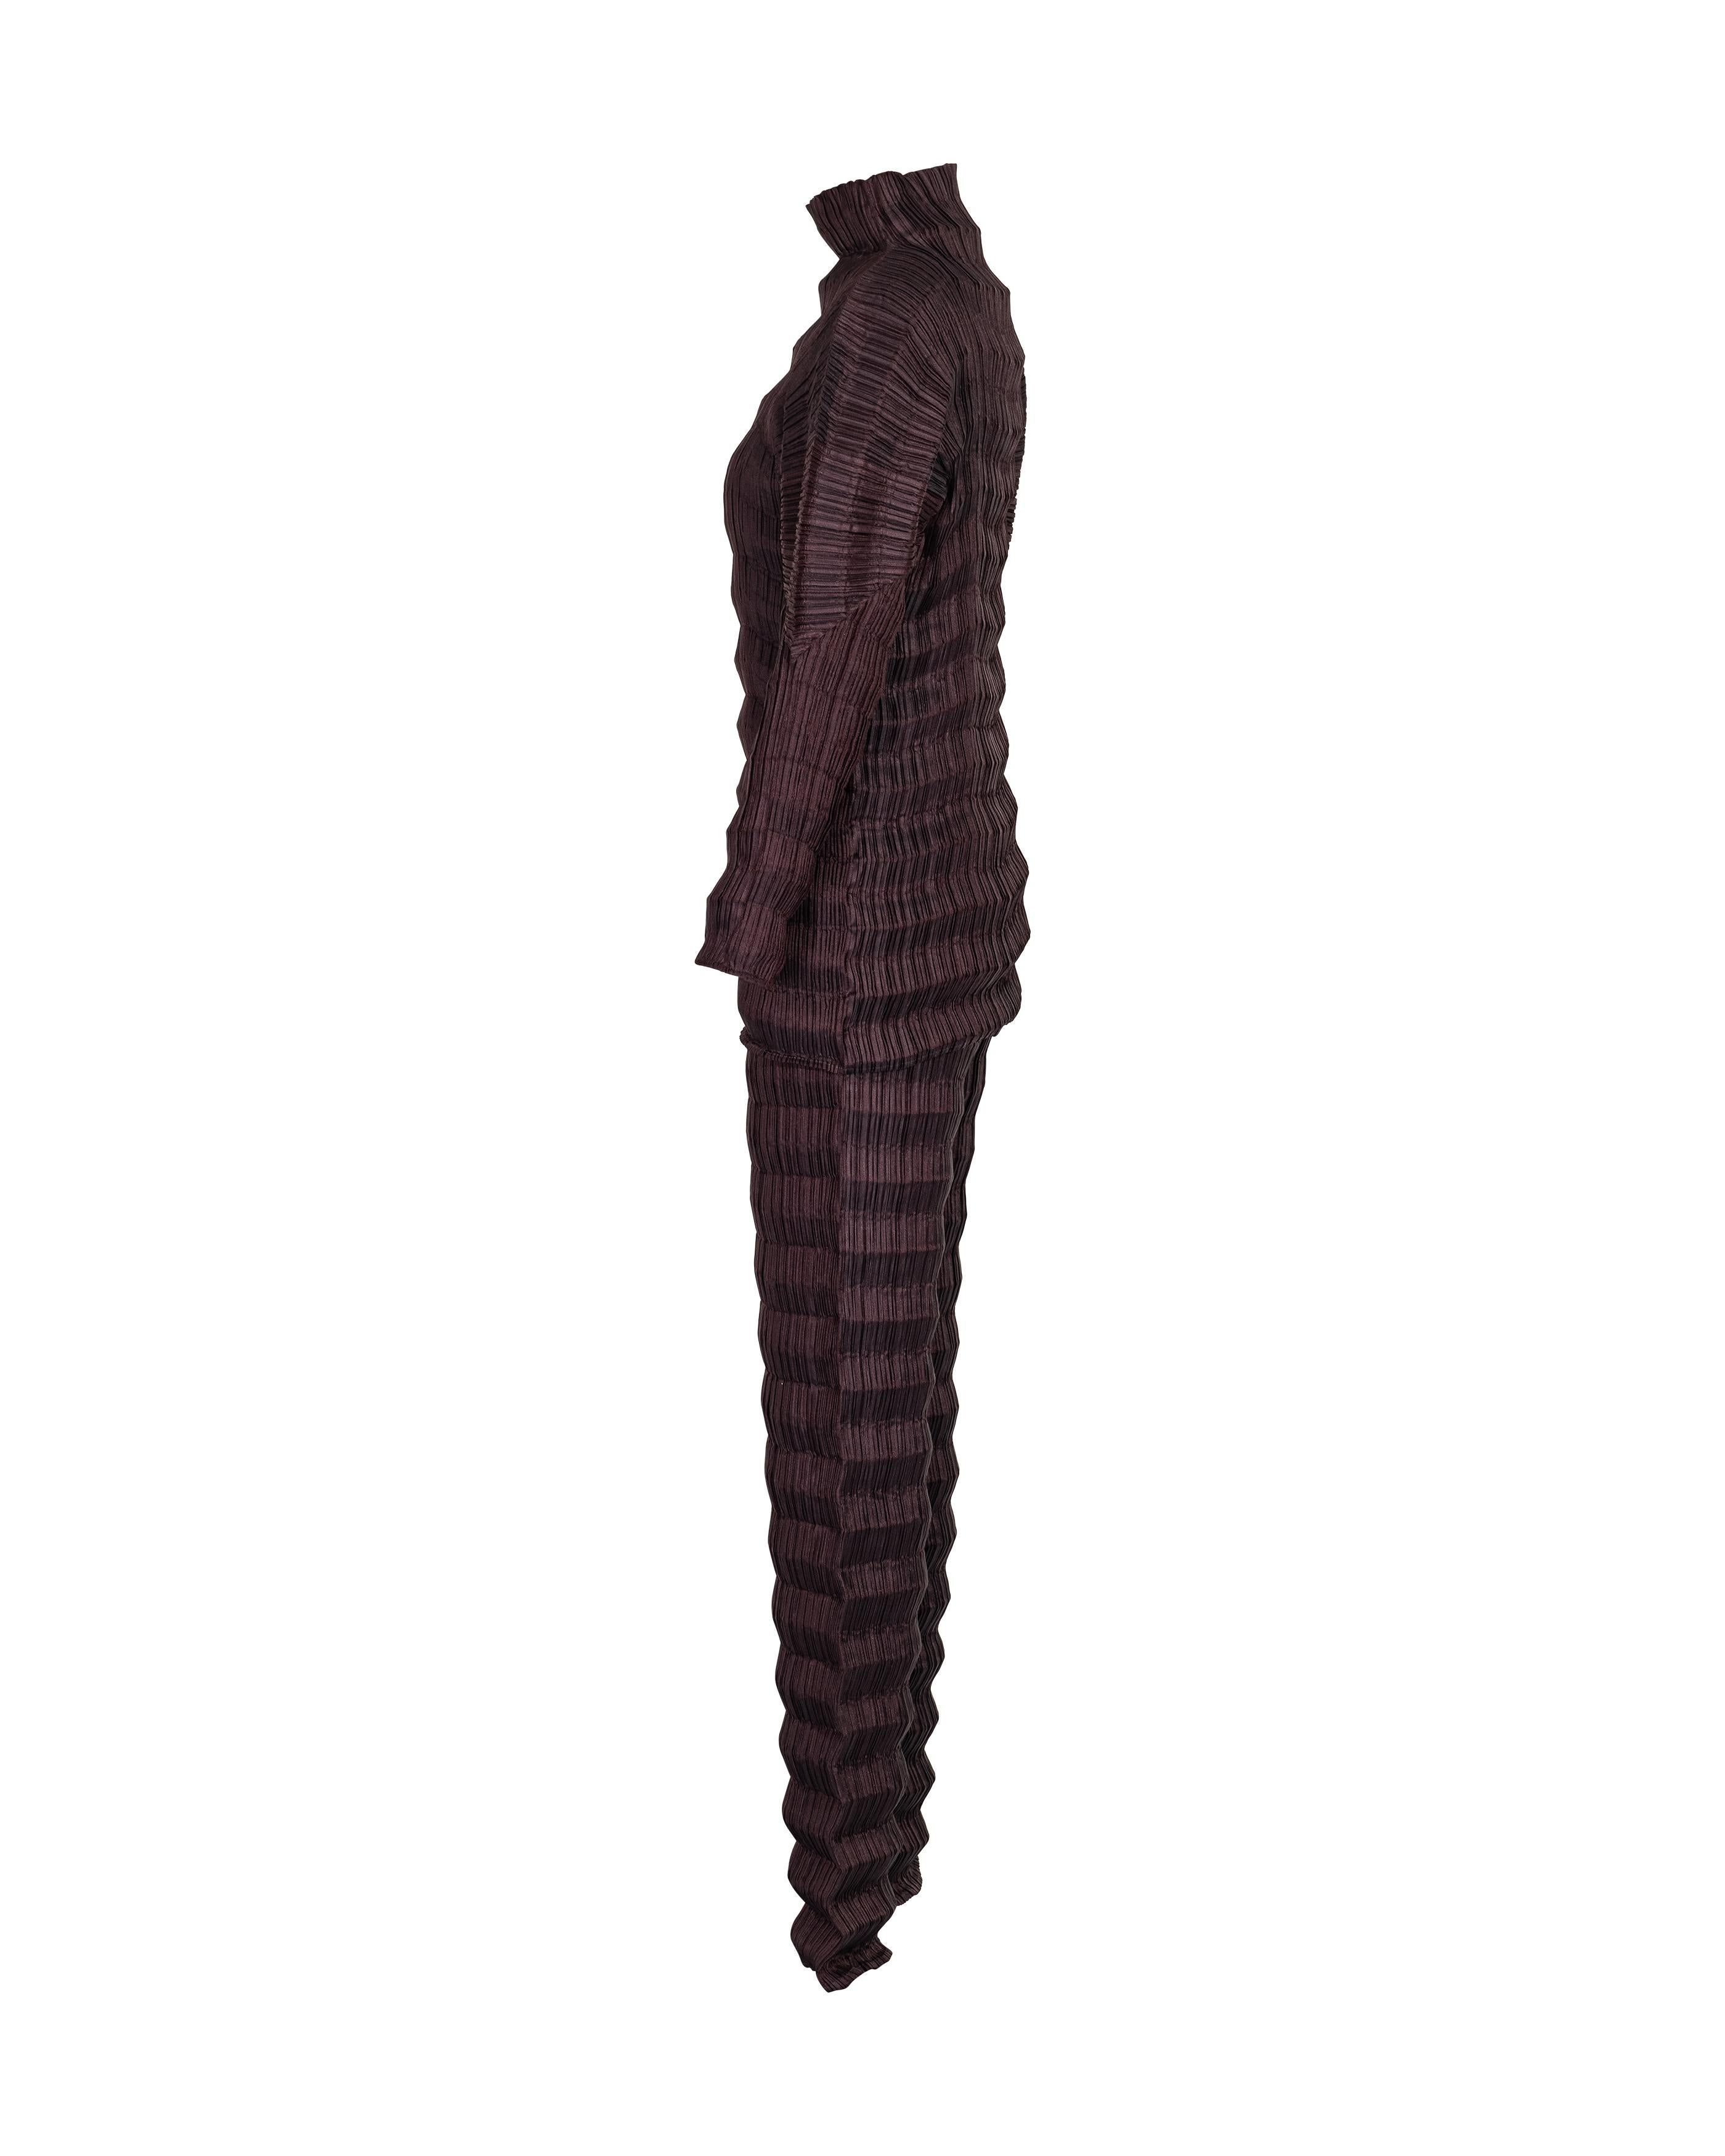 S/S 1996 Issey Miyake brown-purple pleated accordion pant set. Long sleeve pleated mock neck top with curved upper arms pairs with high rise pant. Slight metallic finish throughout. In excellent vintage condition with no flaws to note.

Marked size